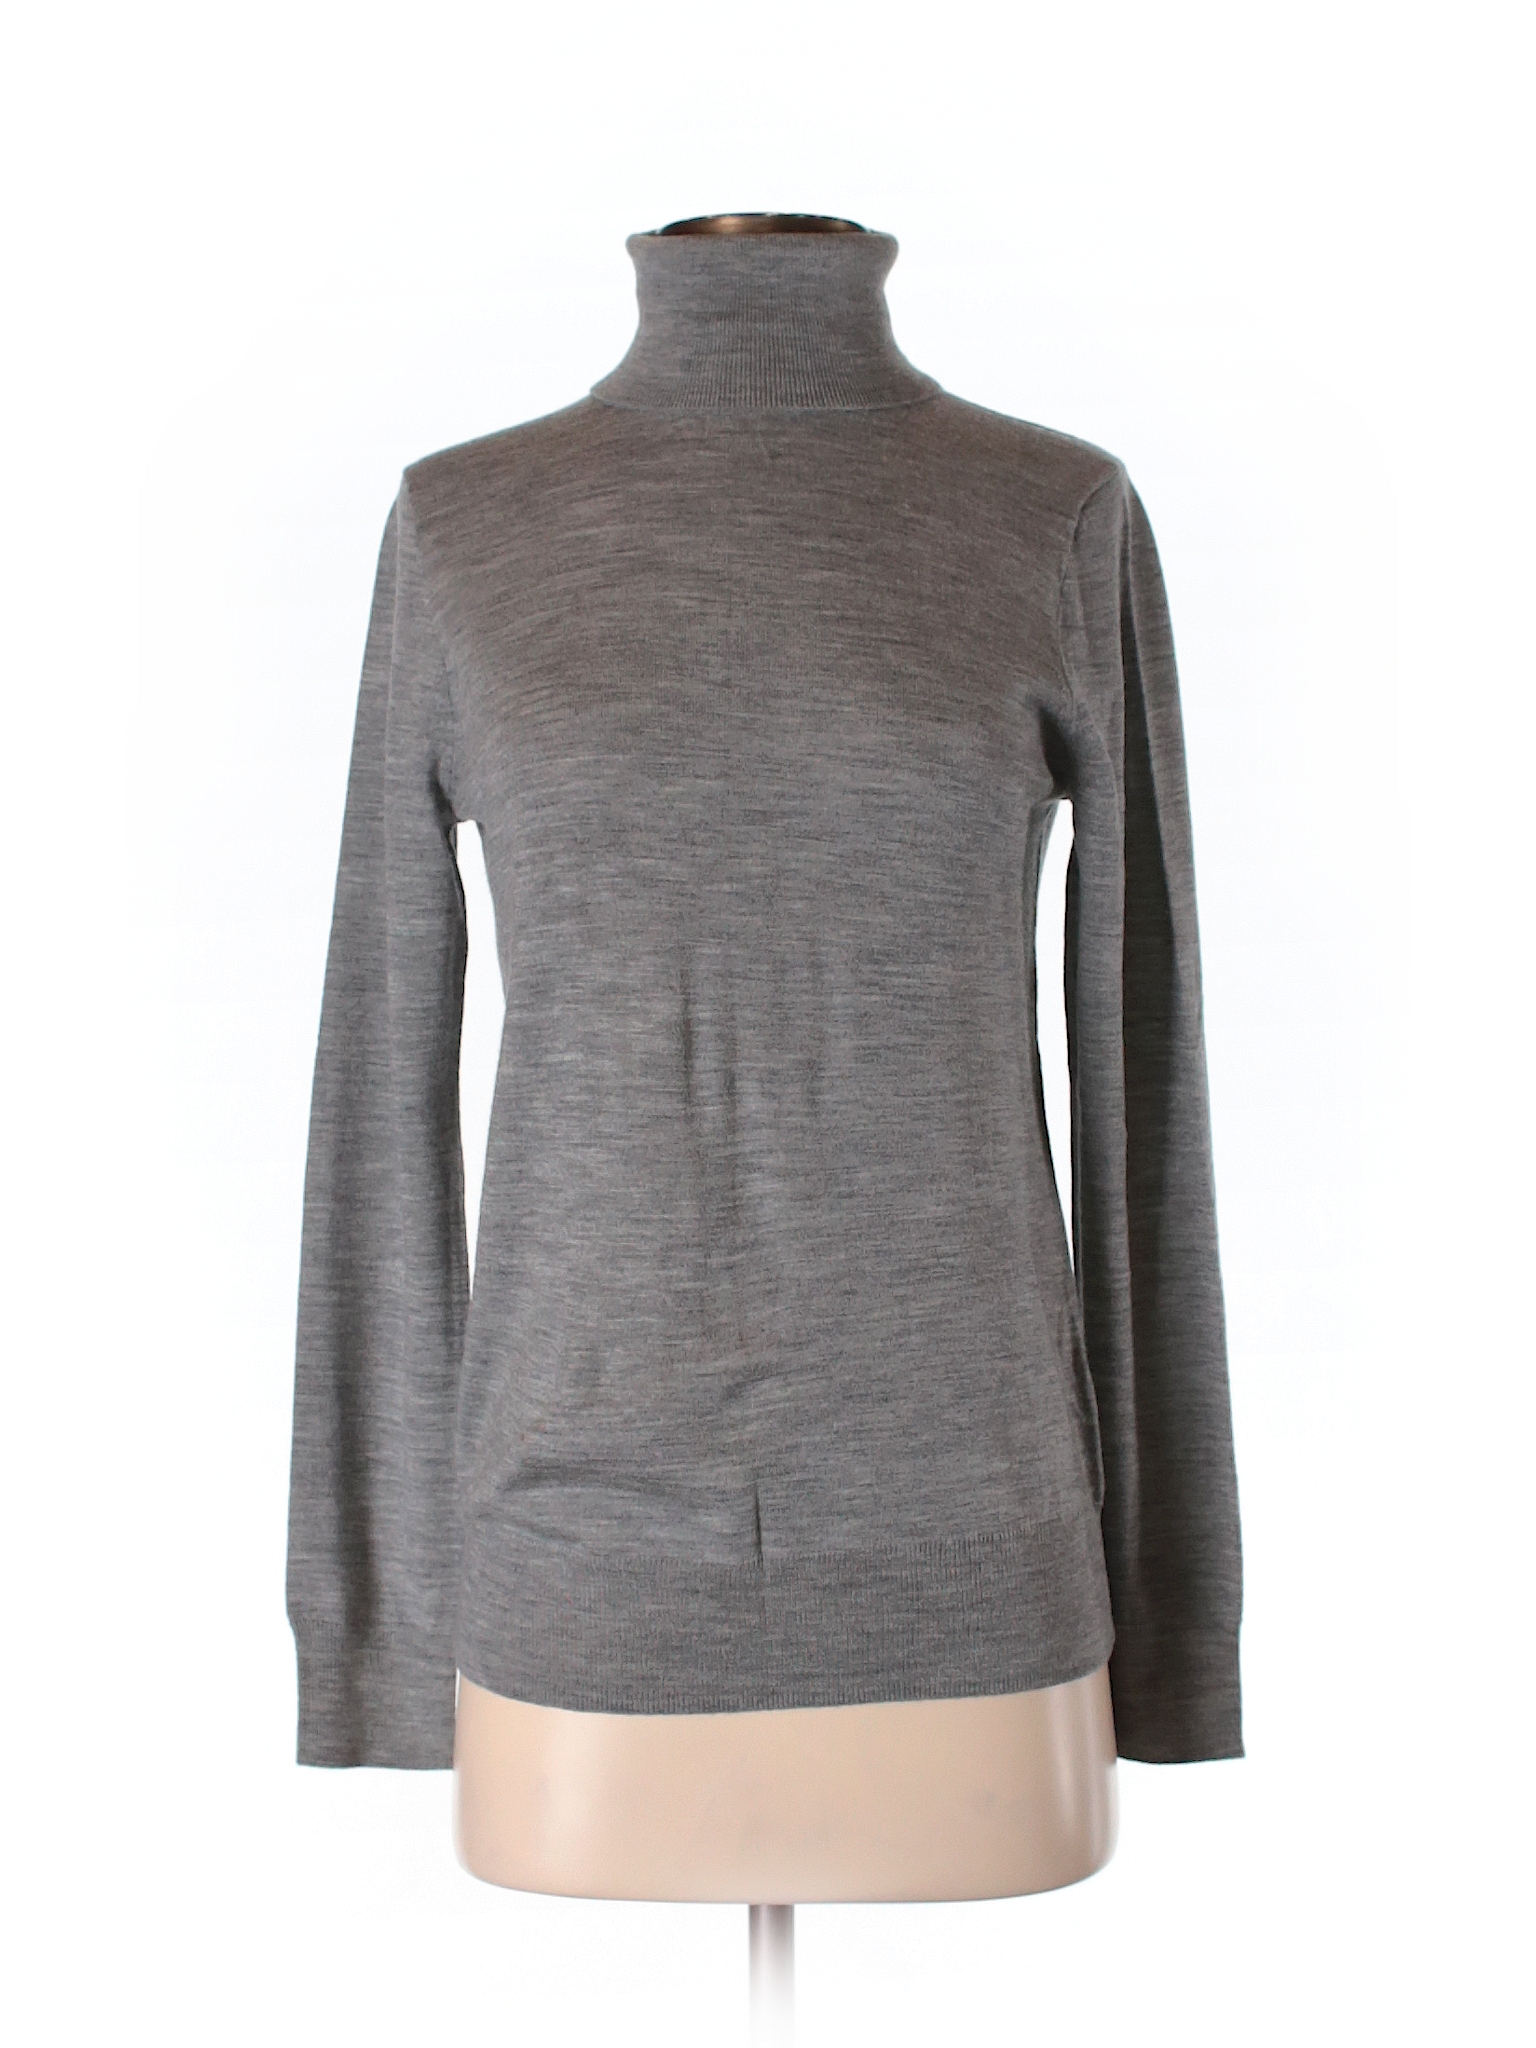 J. Crew 100% Merino Wool Solid Gray Wool Pullover Sweater Size S - 73% ...